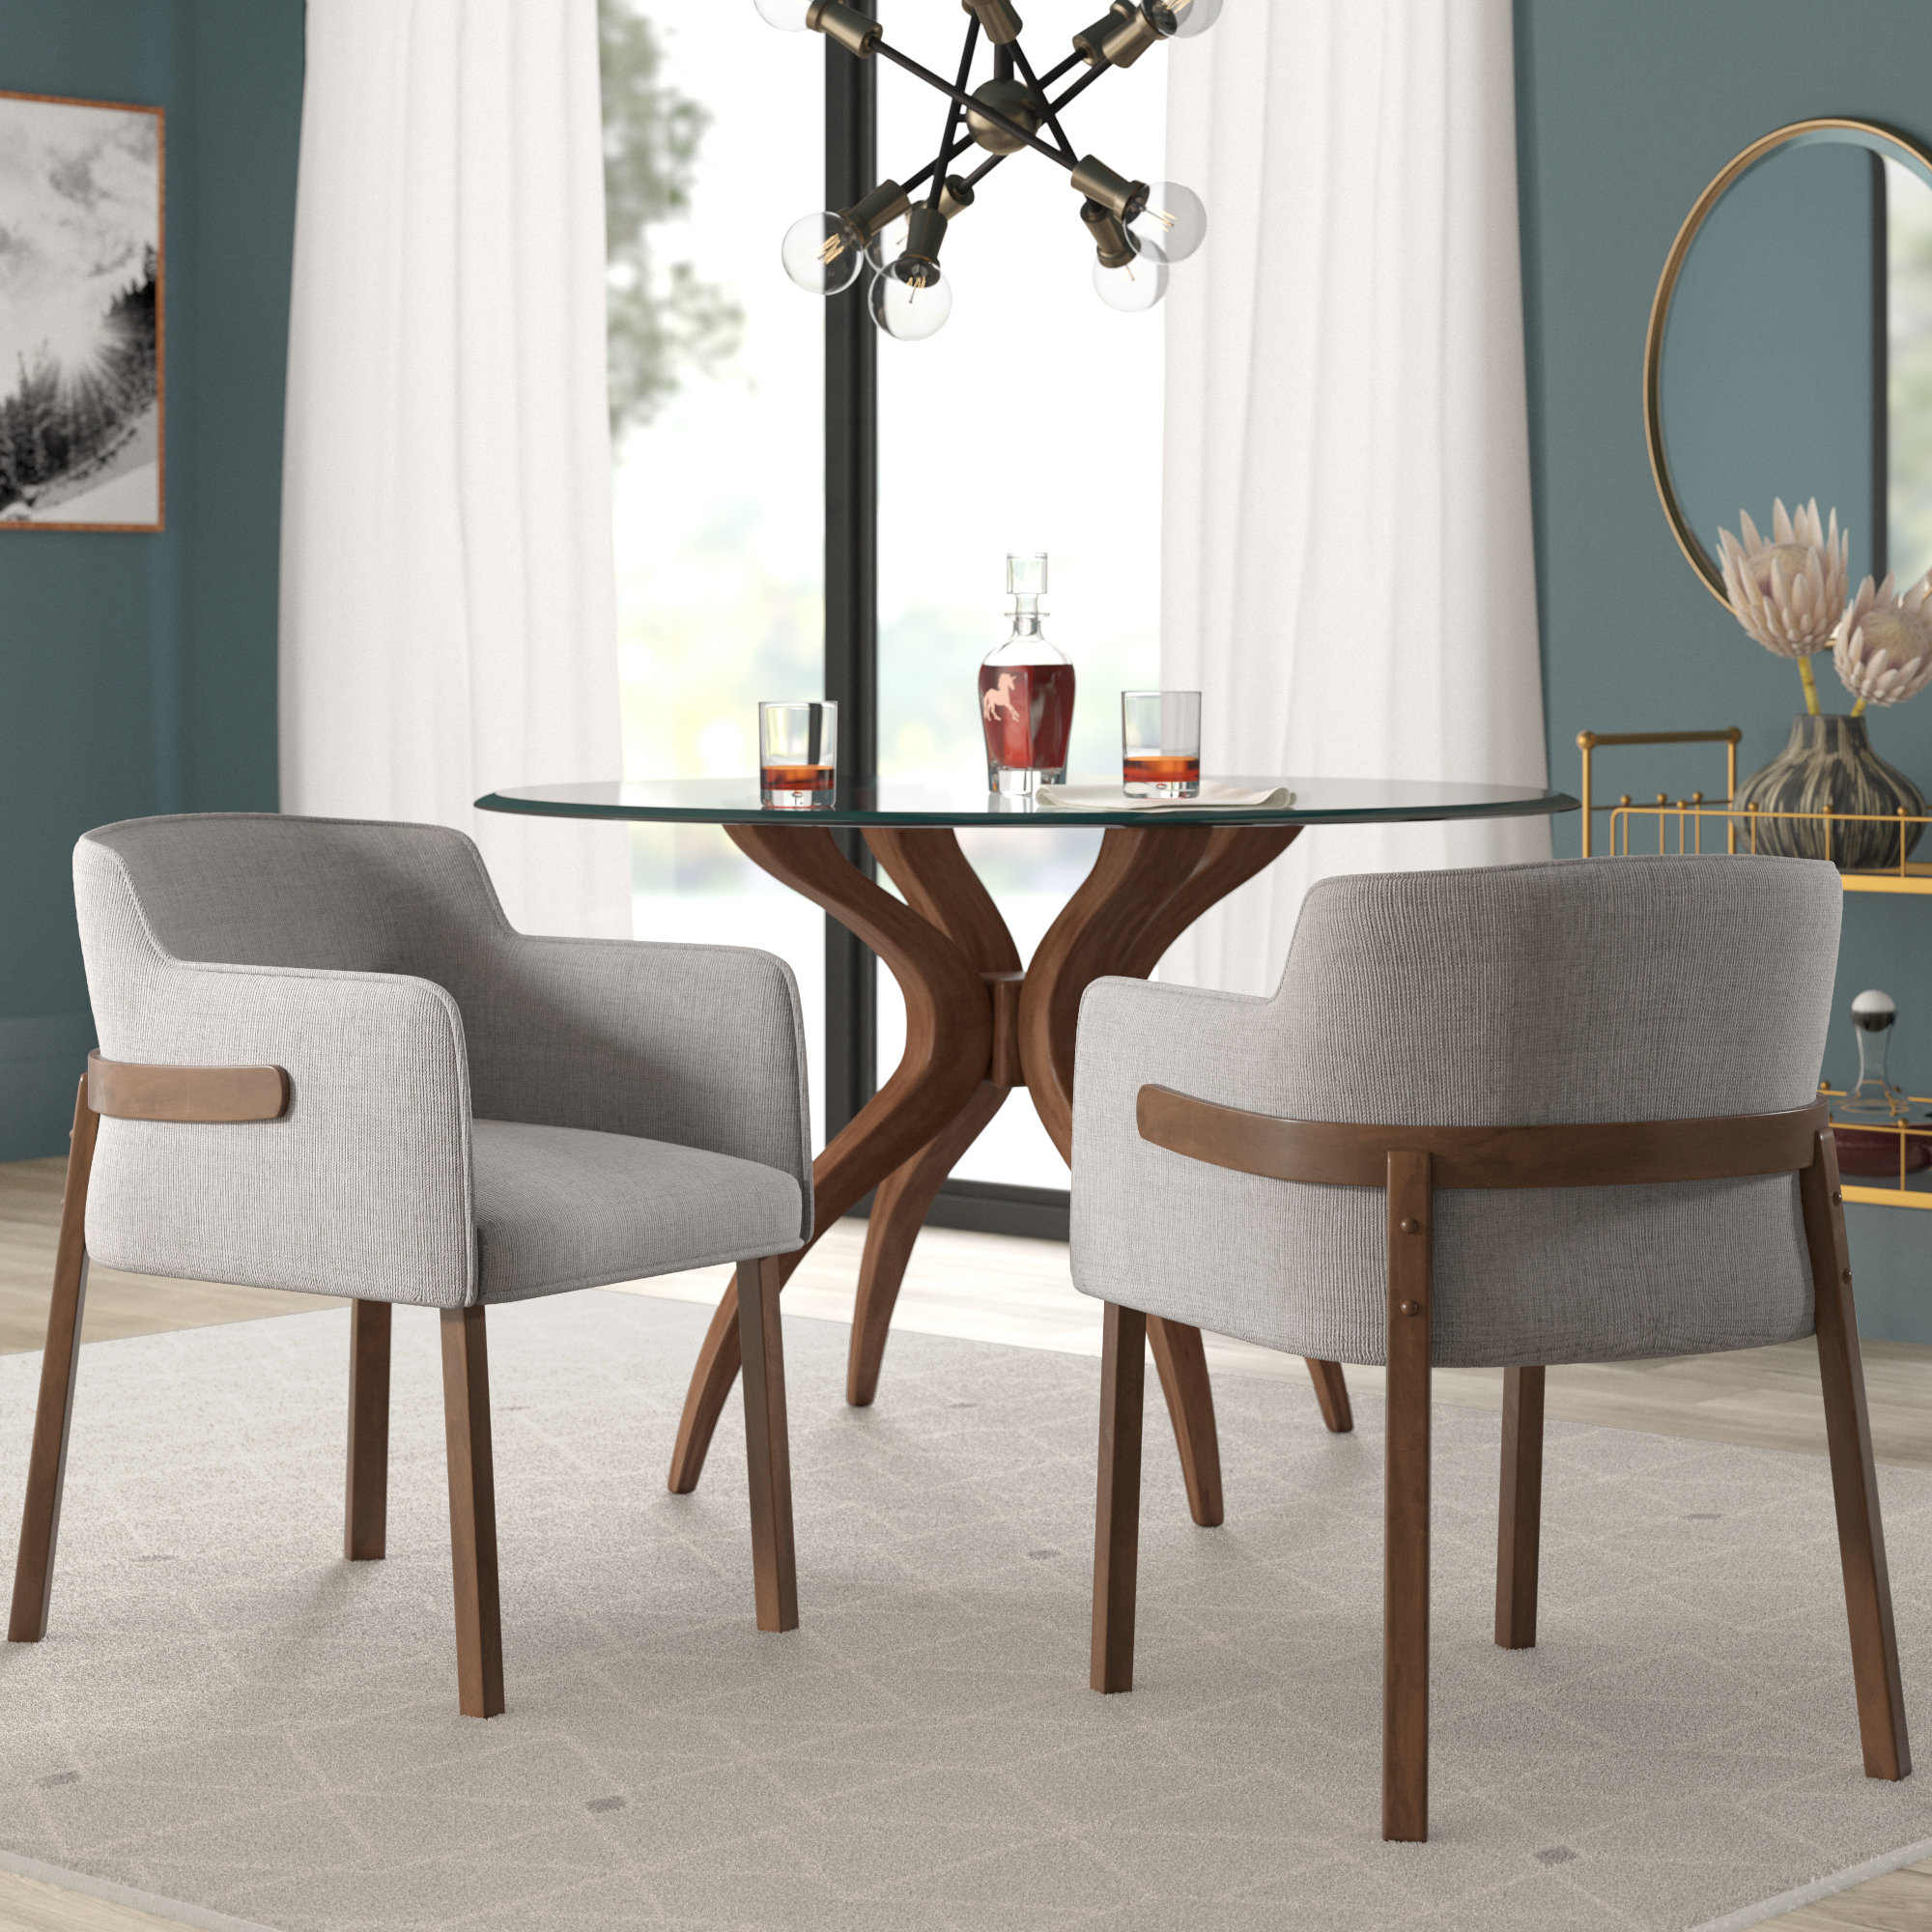 Dining Chairs With Arms Wayfair